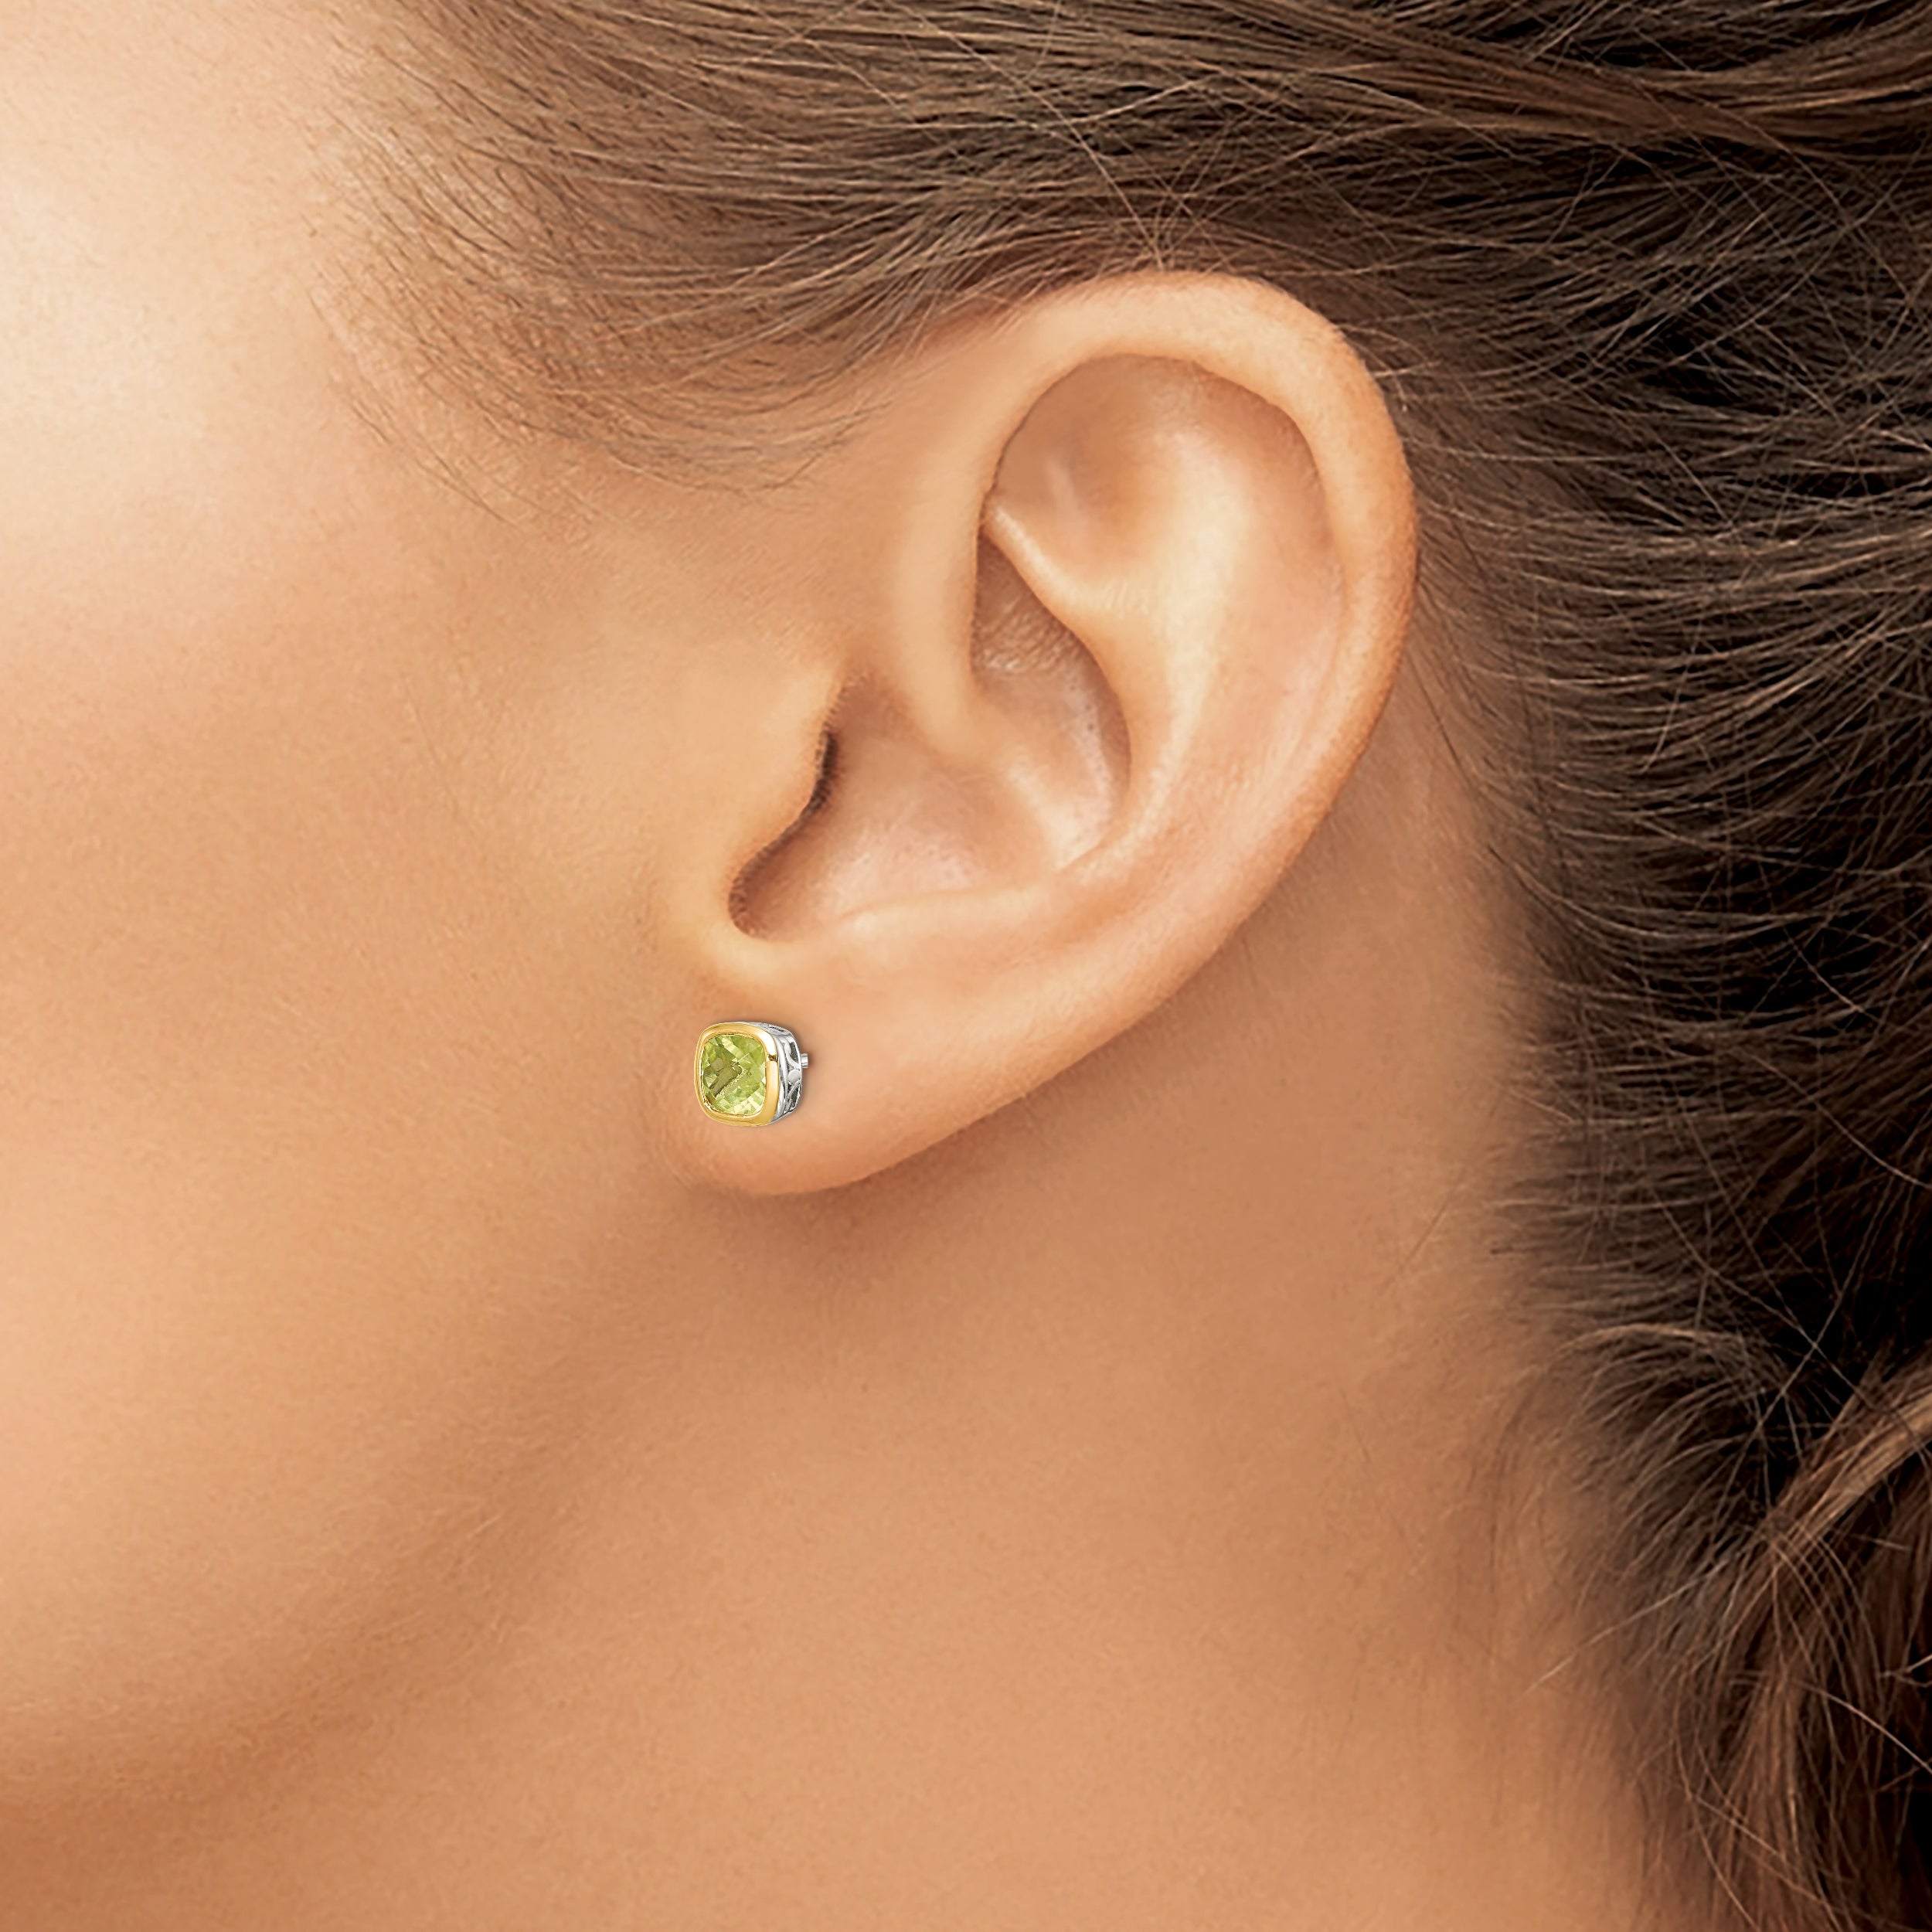 Shey Couture Sterling Silver Rhodium-plated with 14k Accent Peridot Square Stud Earrings